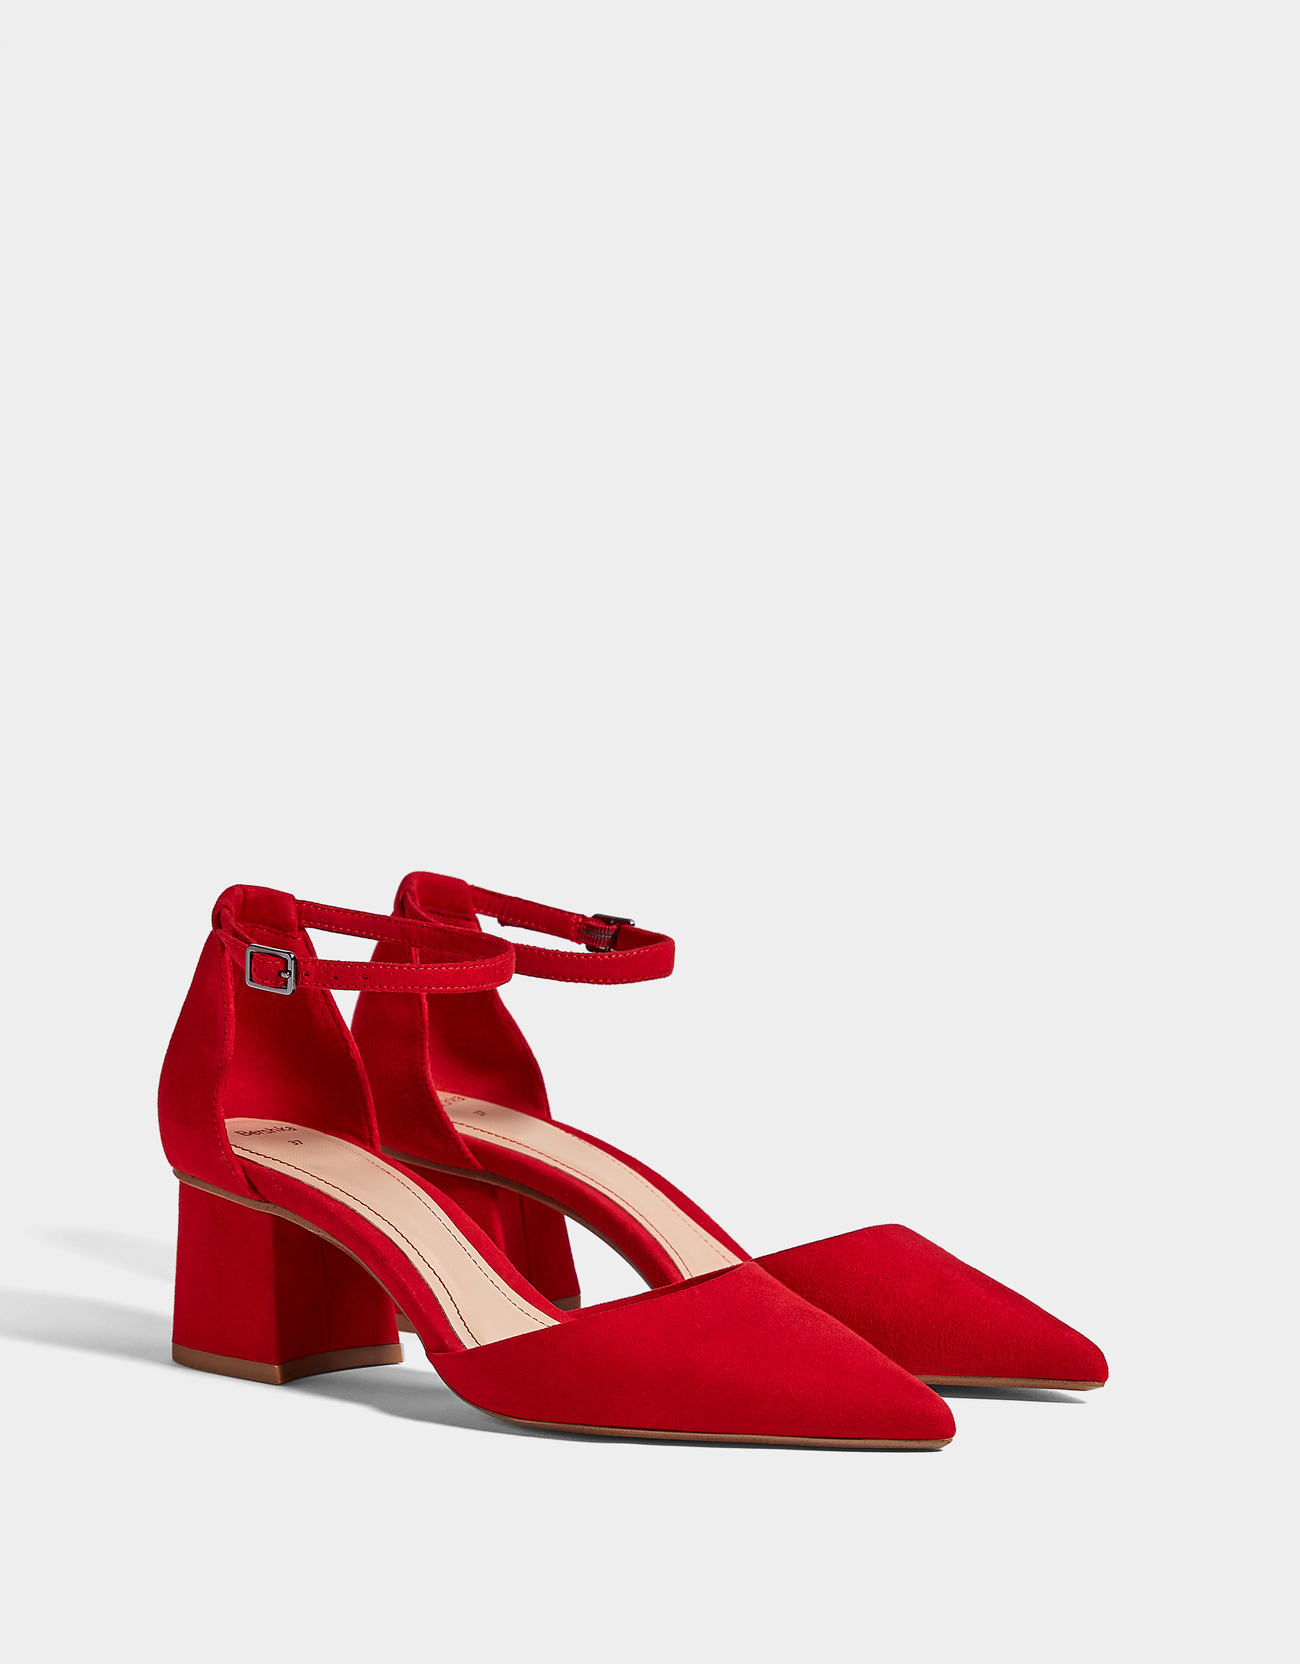 Red mid-heel shoes - SALE UP TO 50% OFF 